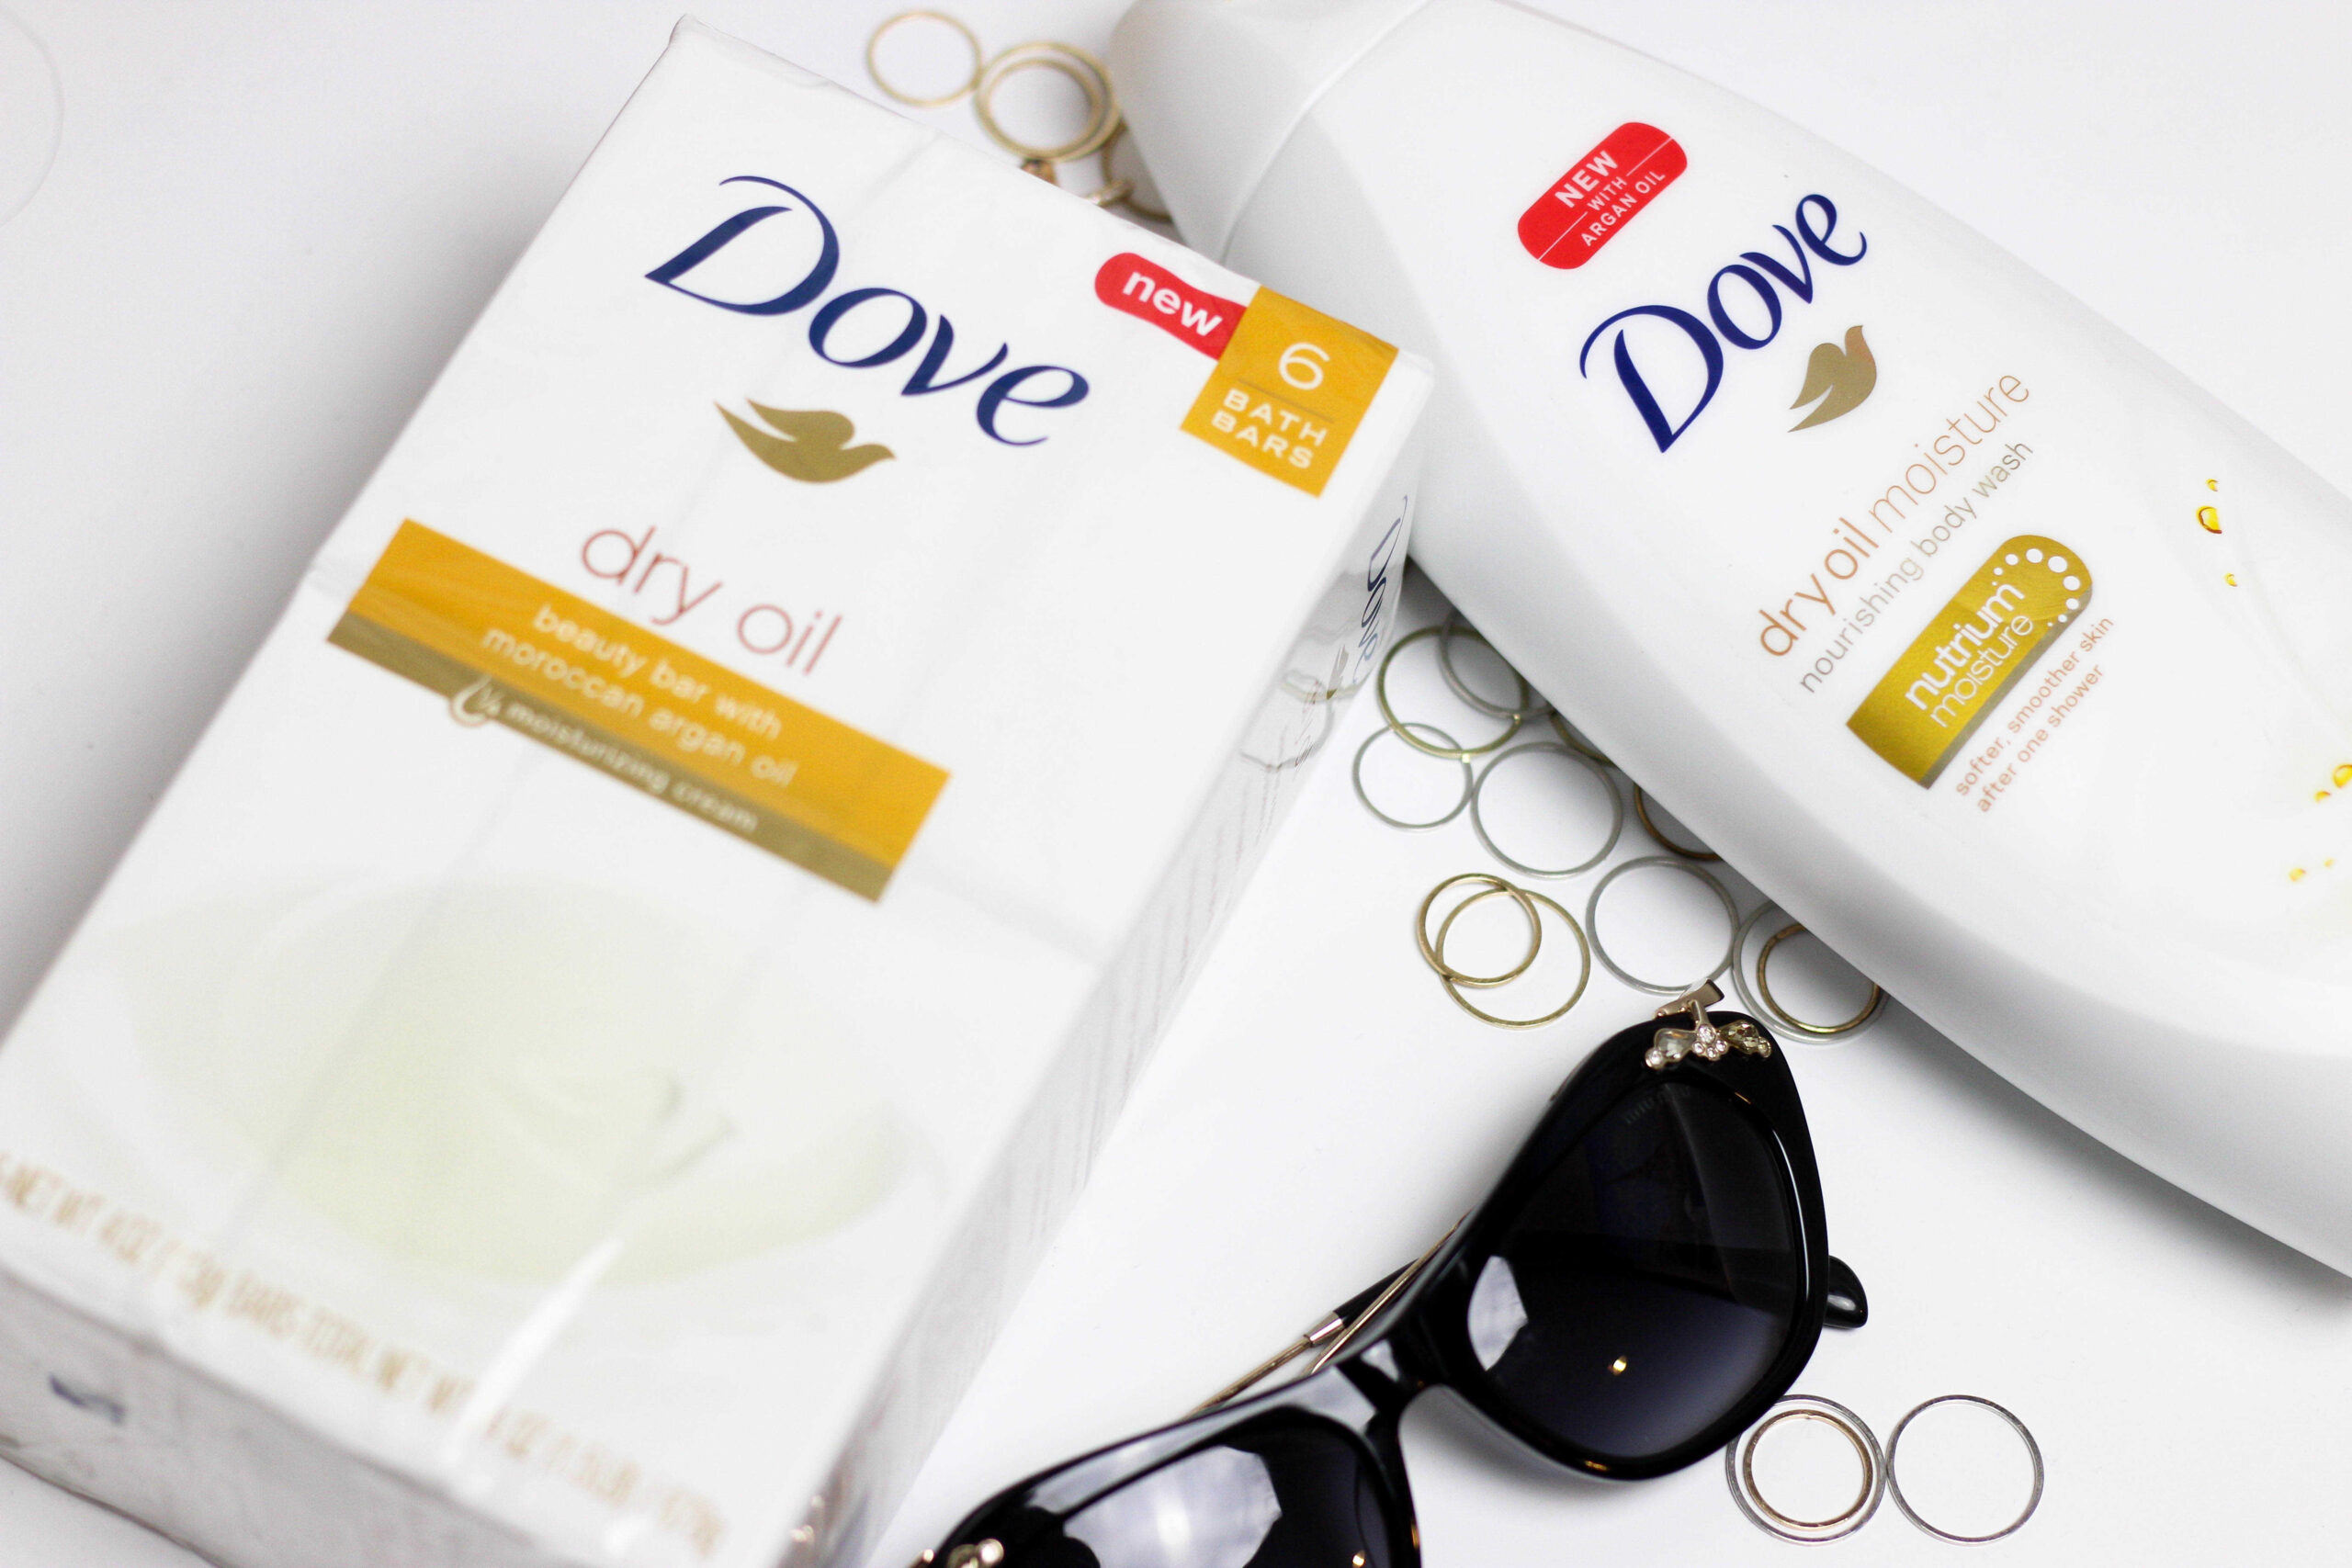 Summer Skin Prep with the Dove Dry Oil Collection - Jordan Taylor C